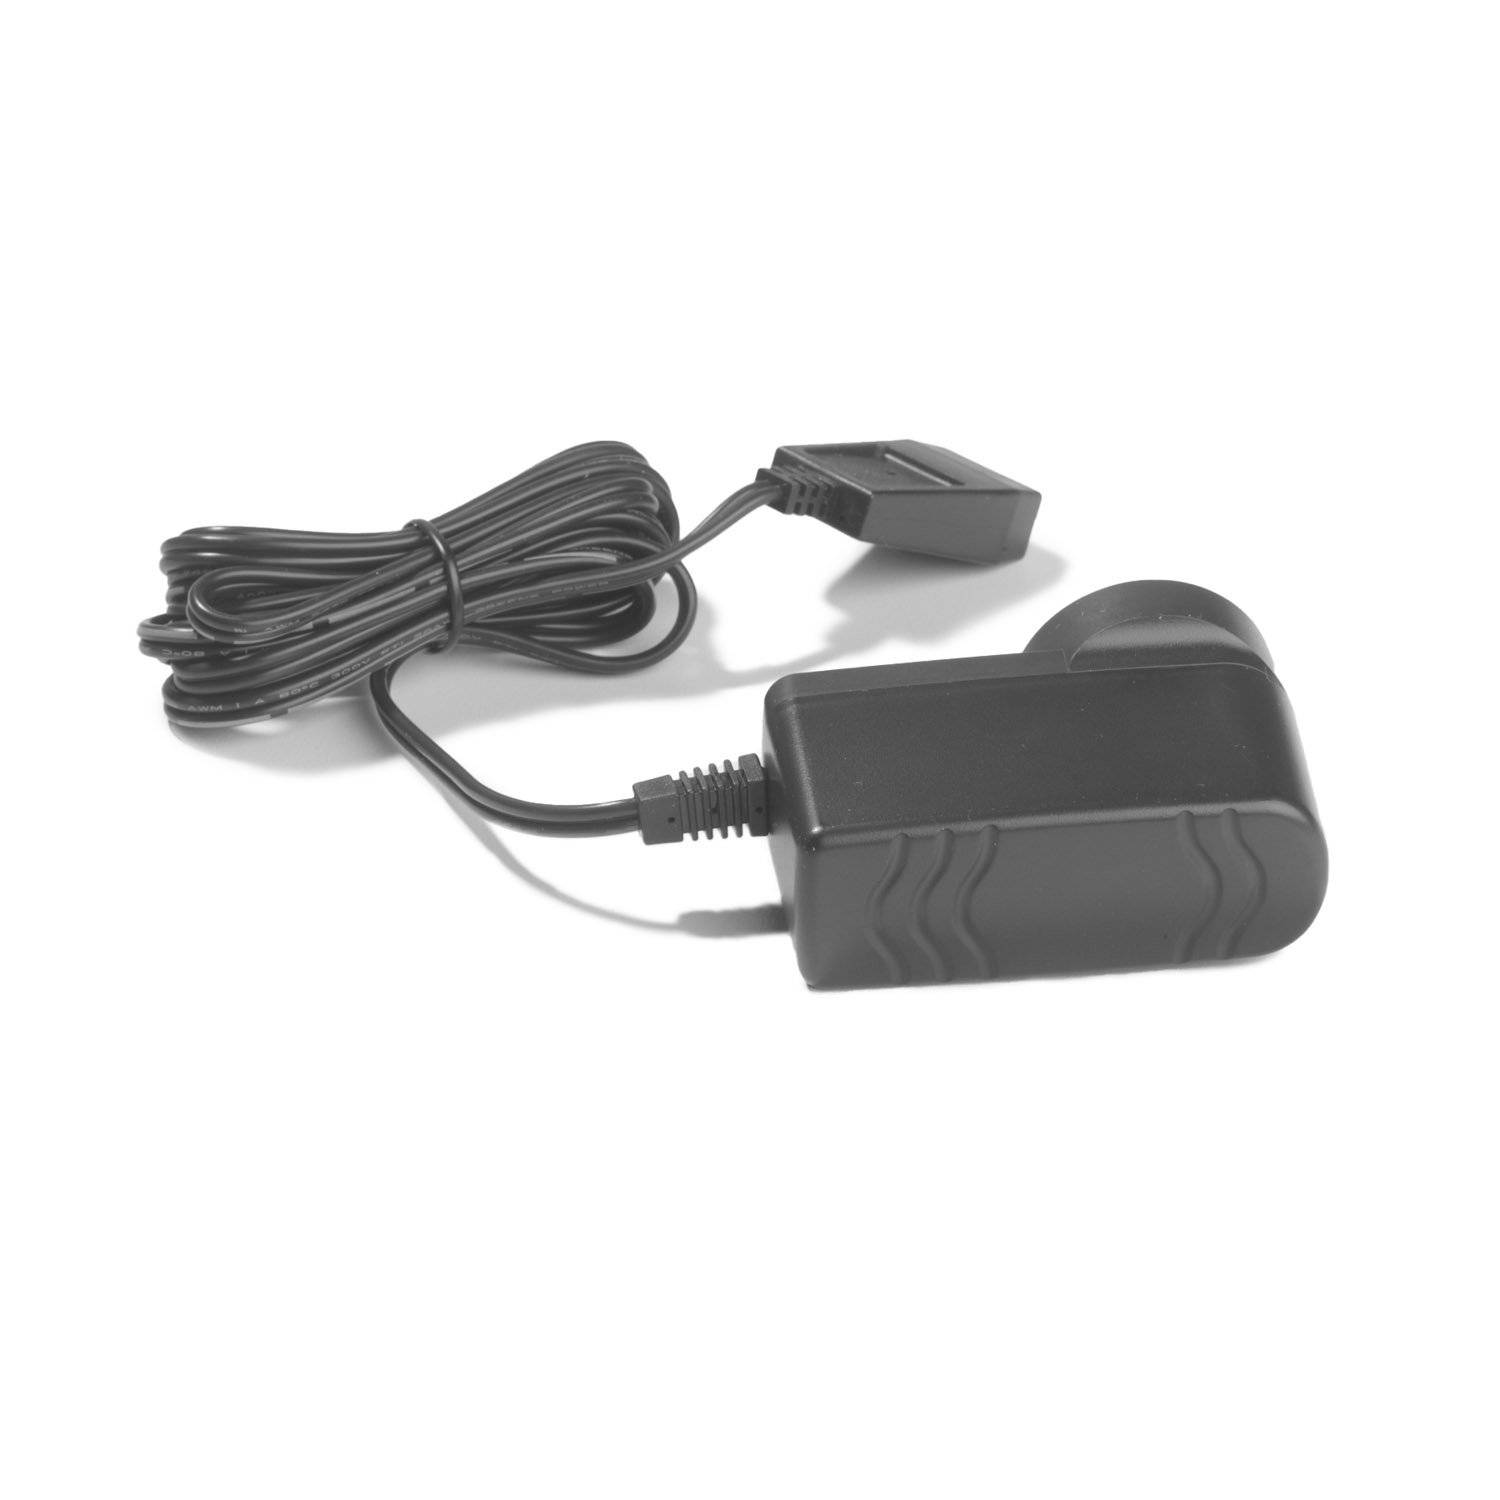 Streamlight Charger AC Cord 22311 Guaranteed 12v Transformer for sale online 